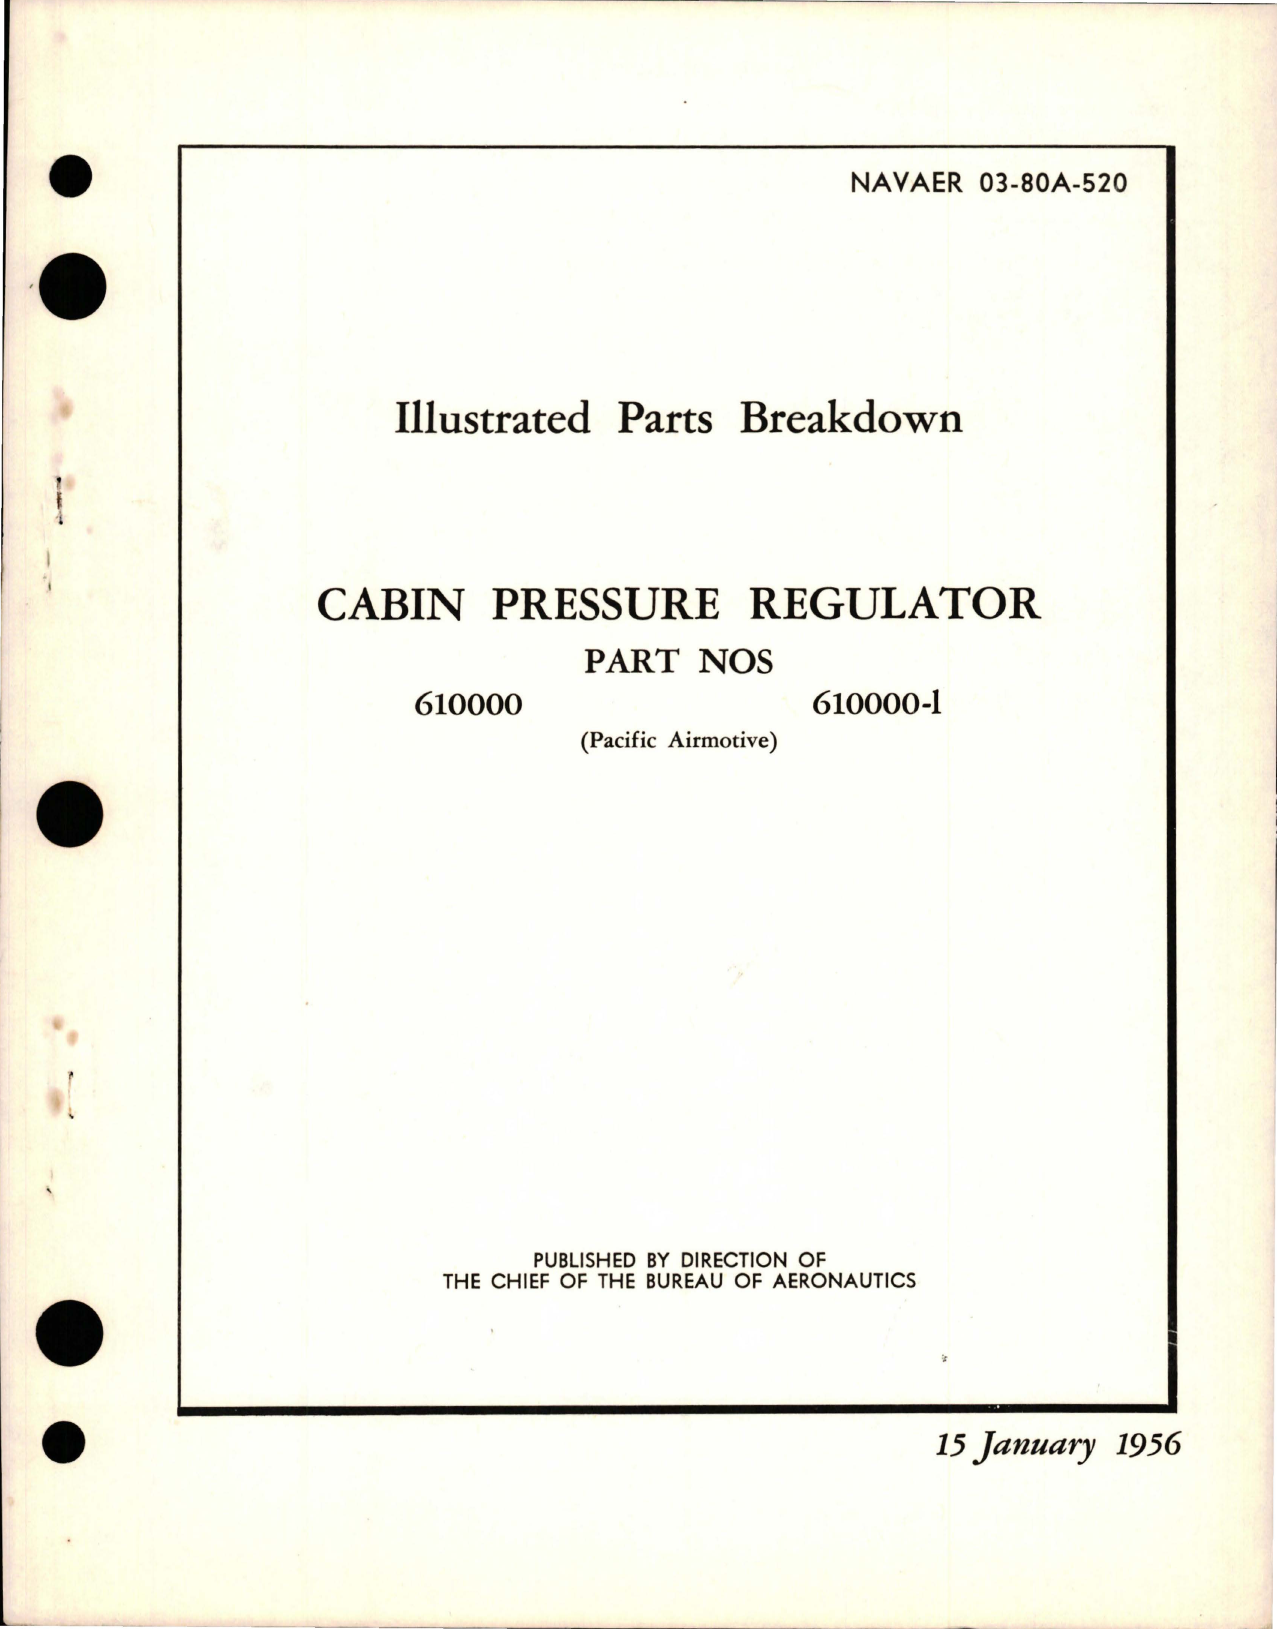 Sample page 1 from AirCorps Library document: Illustrated Parts Breakdown for Cabin Pressure Regulator - Parts 610000 and 610000-1